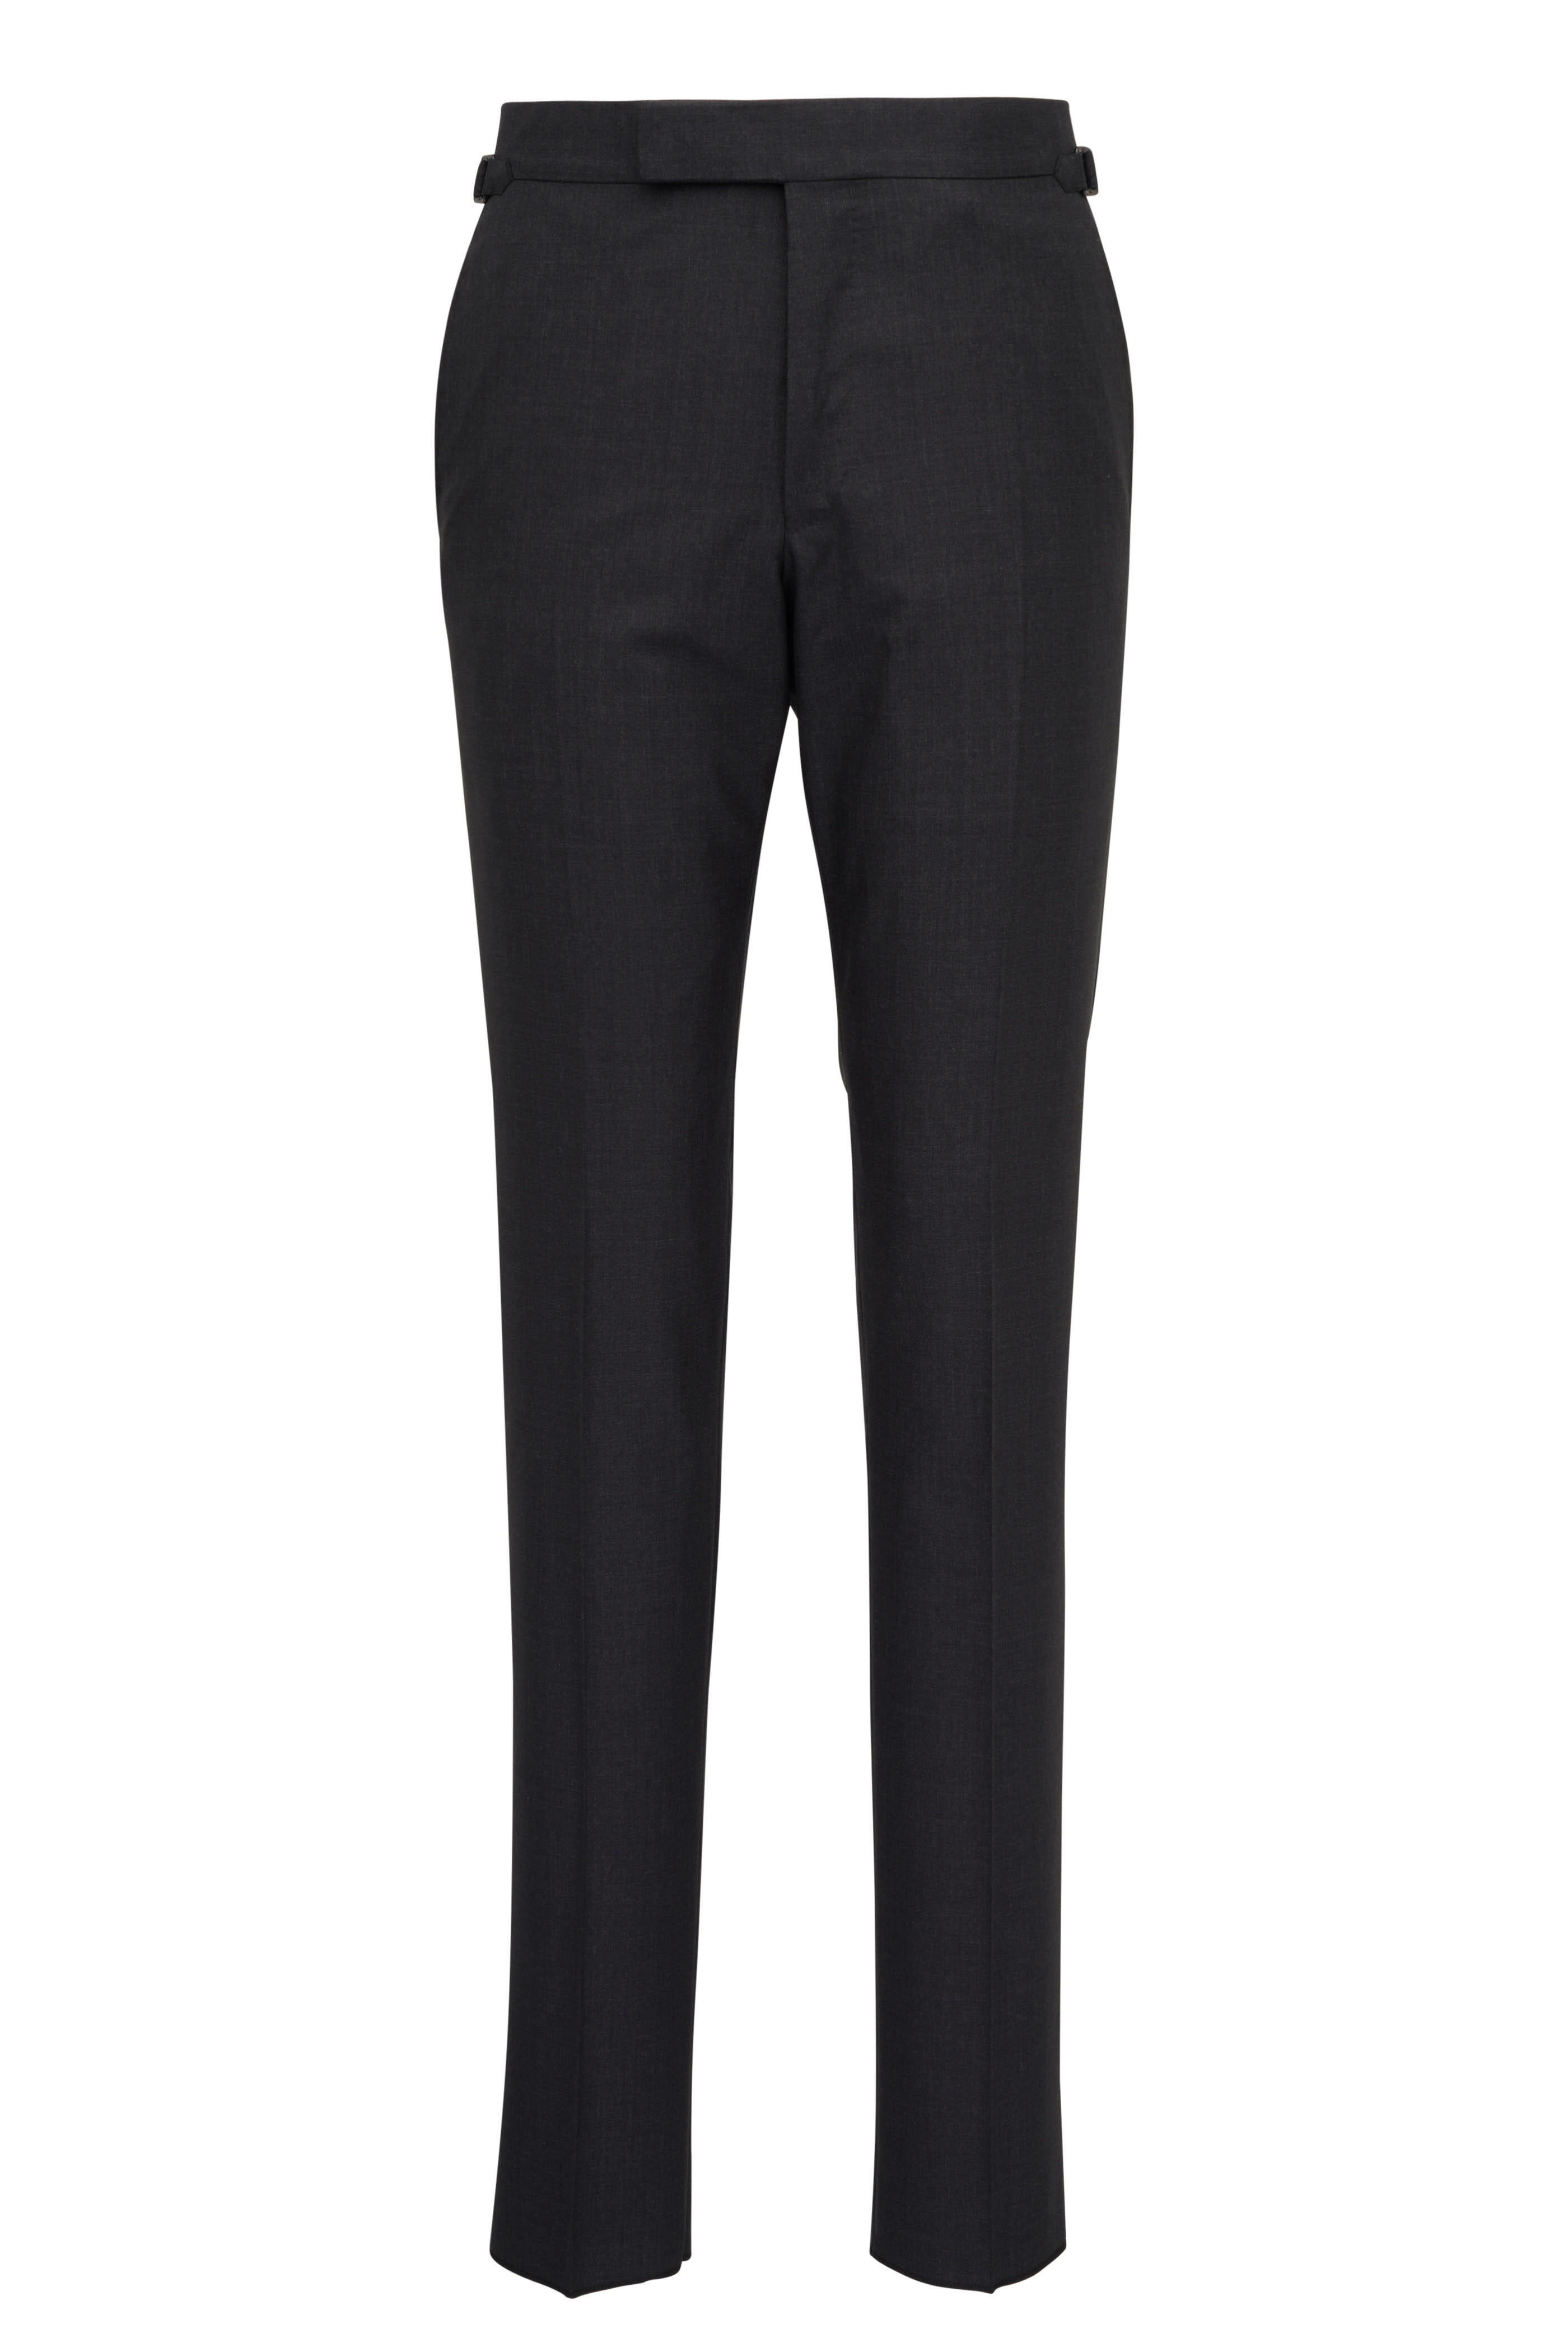 Tom Ford - O'Connor Dark Gray Super 120's Suit | Mitchell Stores